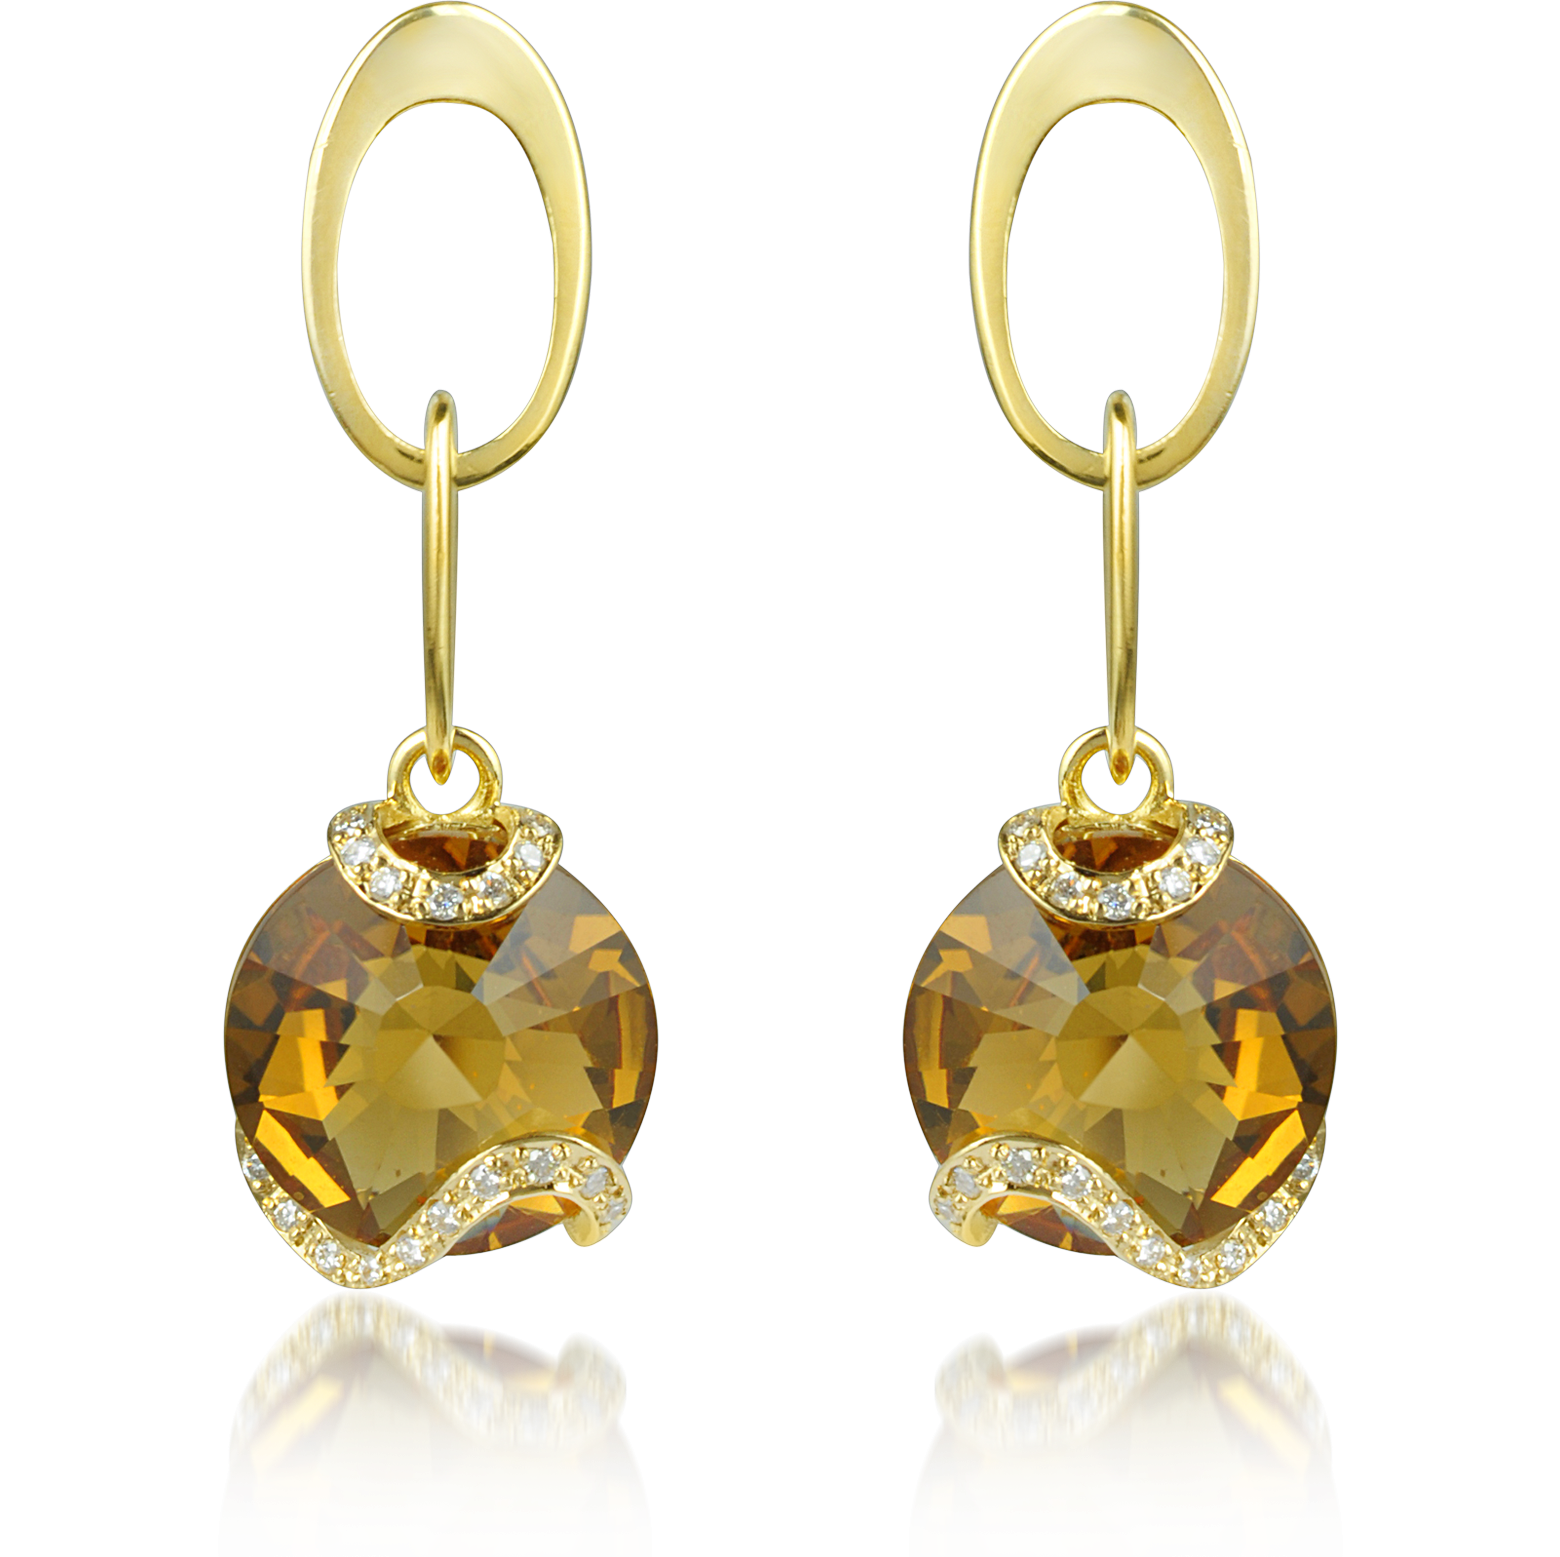 Incanto Royale Citrine and Diamond 18K Gold Earrings at FORZIERI